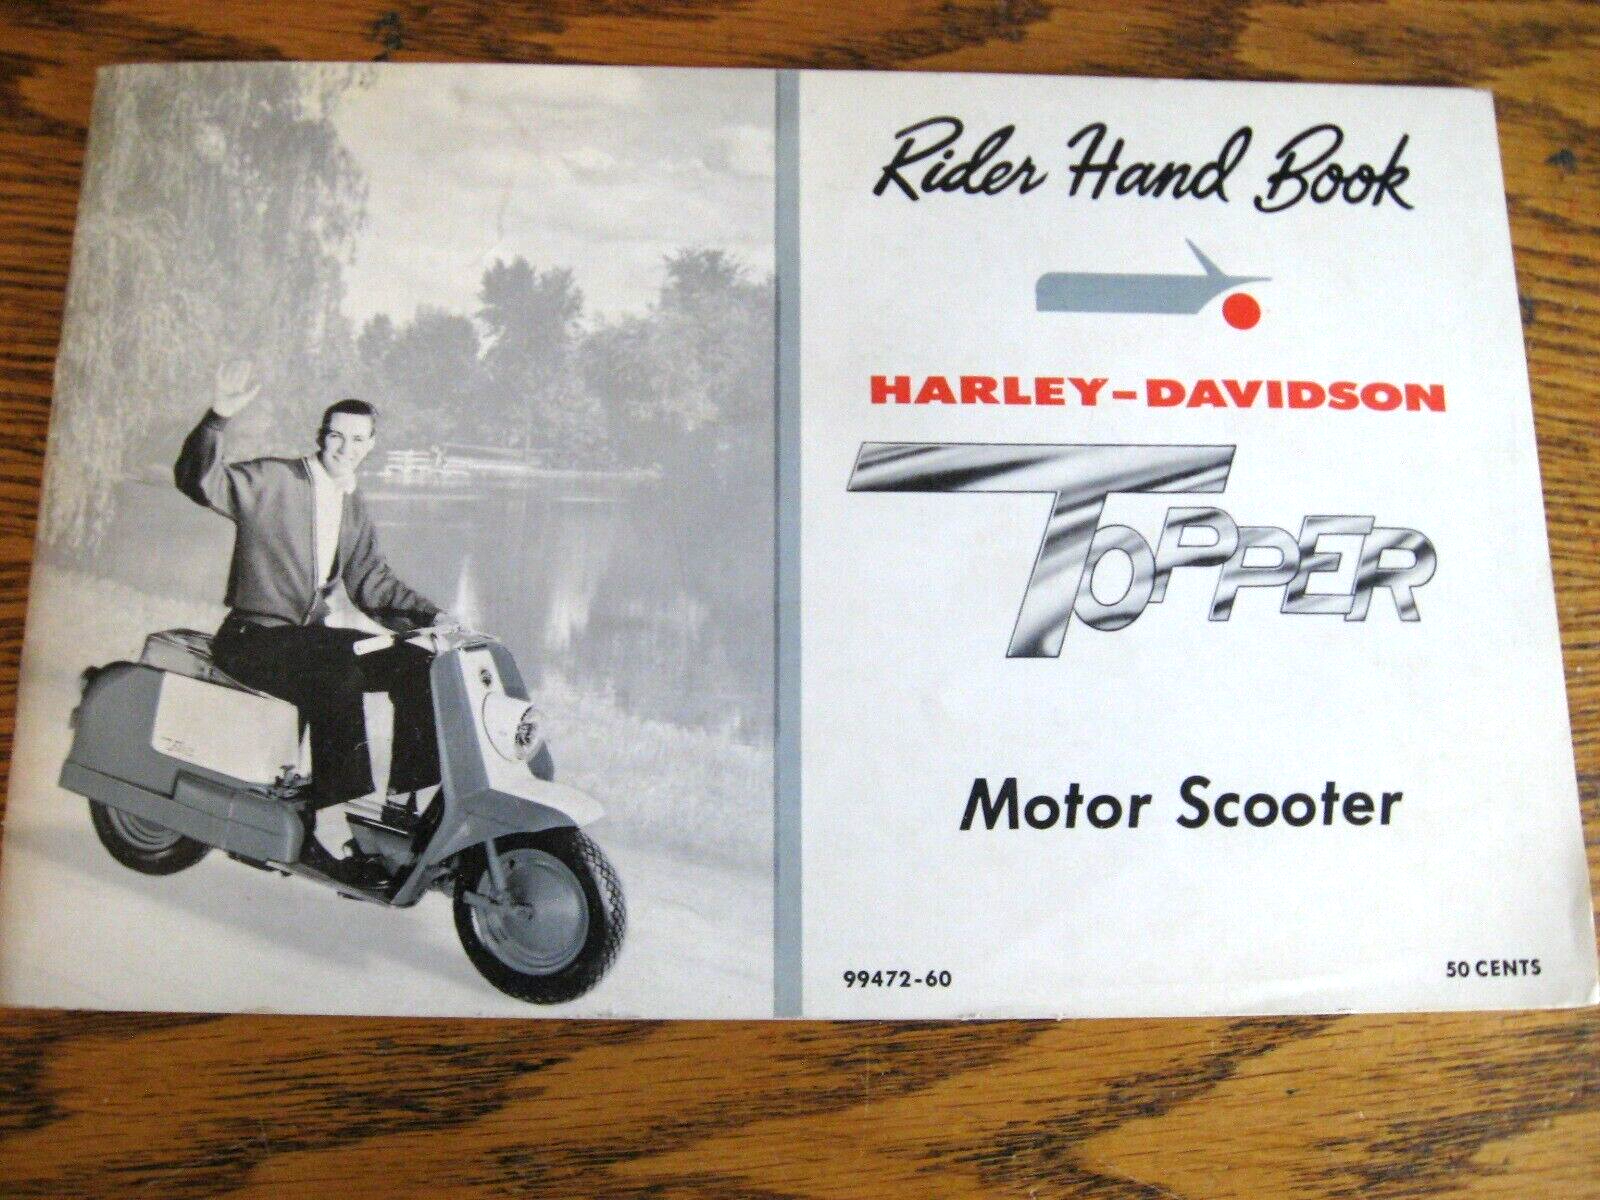 1960 Harley Davidson Topper Motor Scooter Rider Hand Book Owners Manual AU A NOS - $147.51